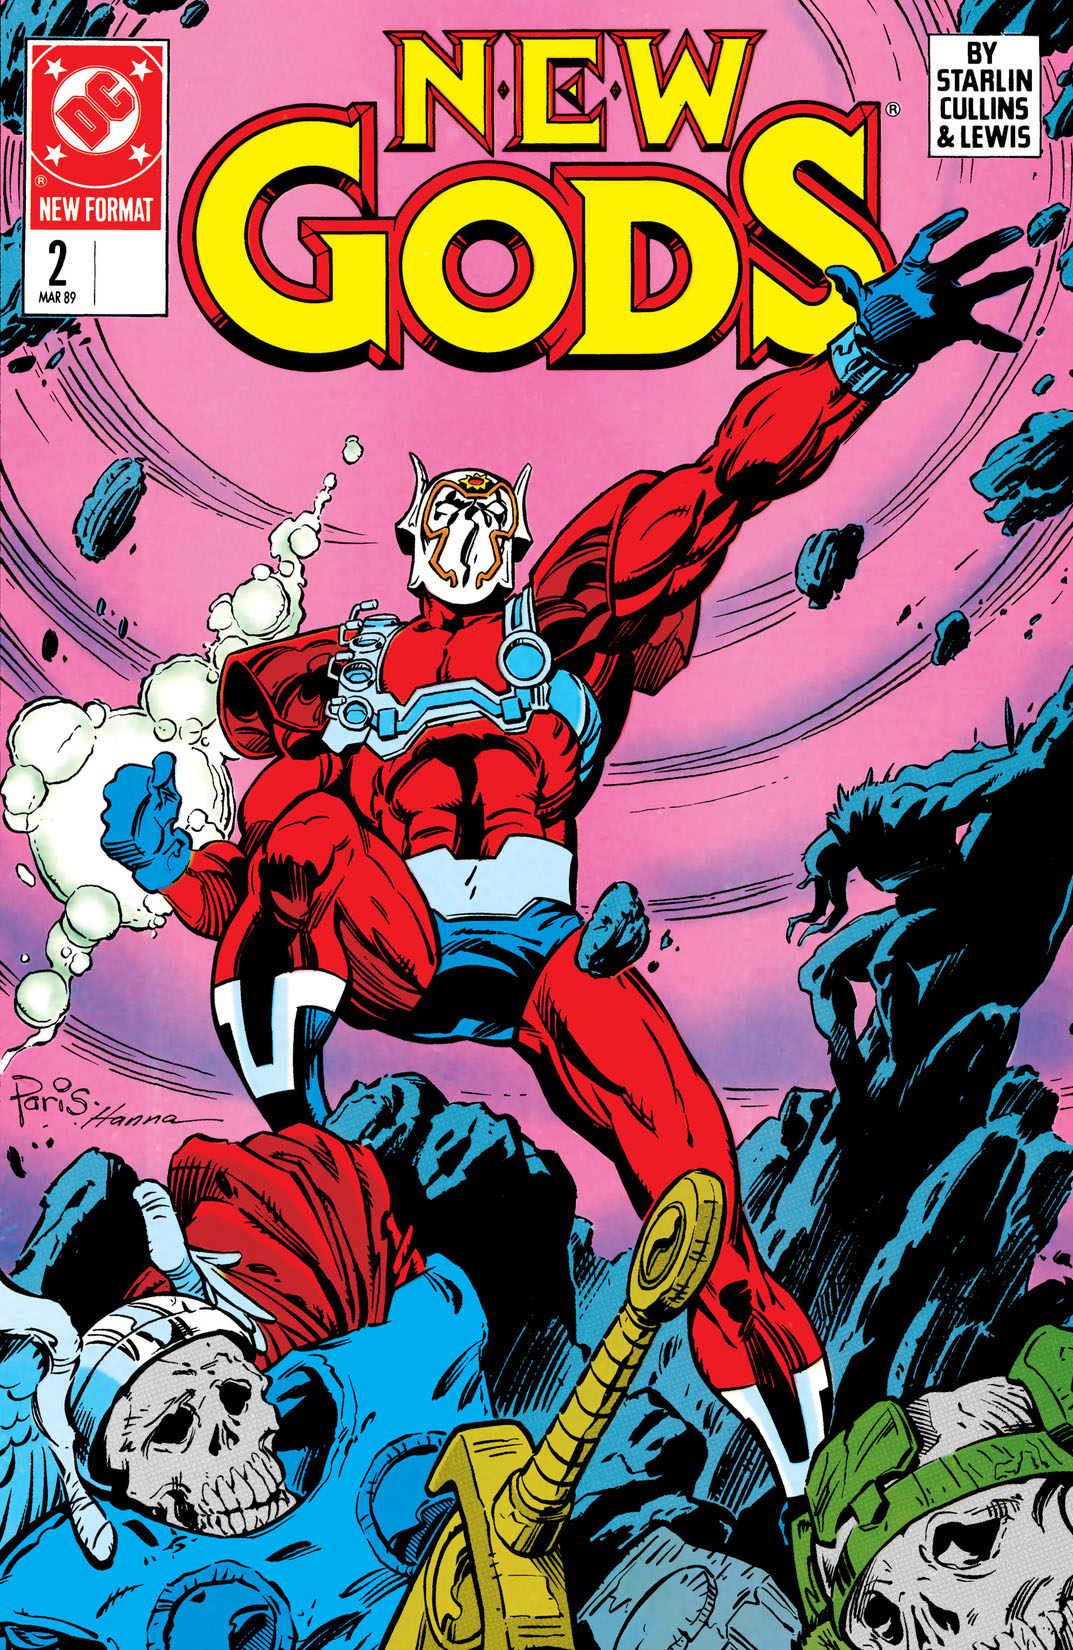 New Gods (1989-) #2 preview images